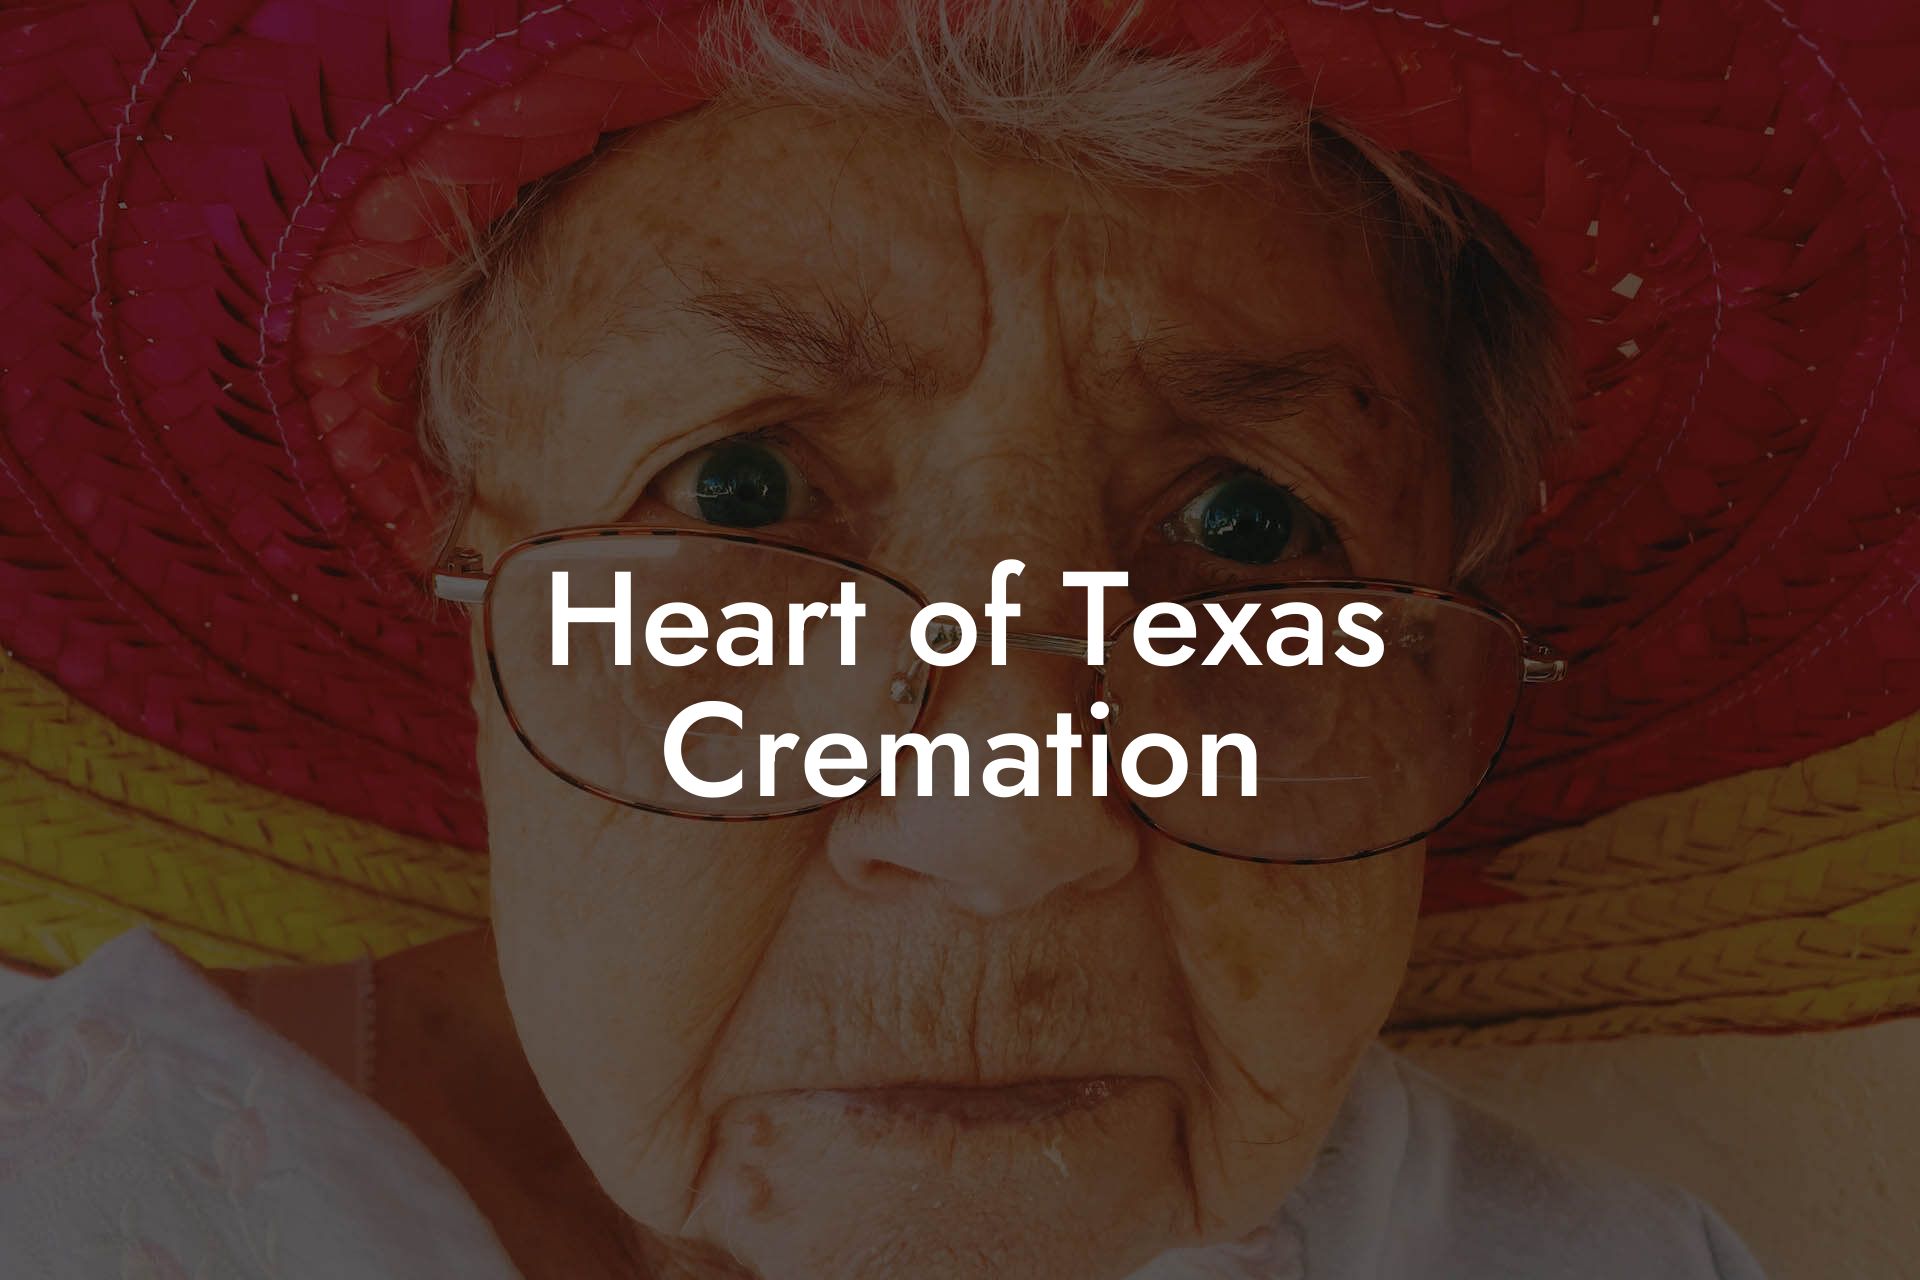 Heart of Texas Cremation